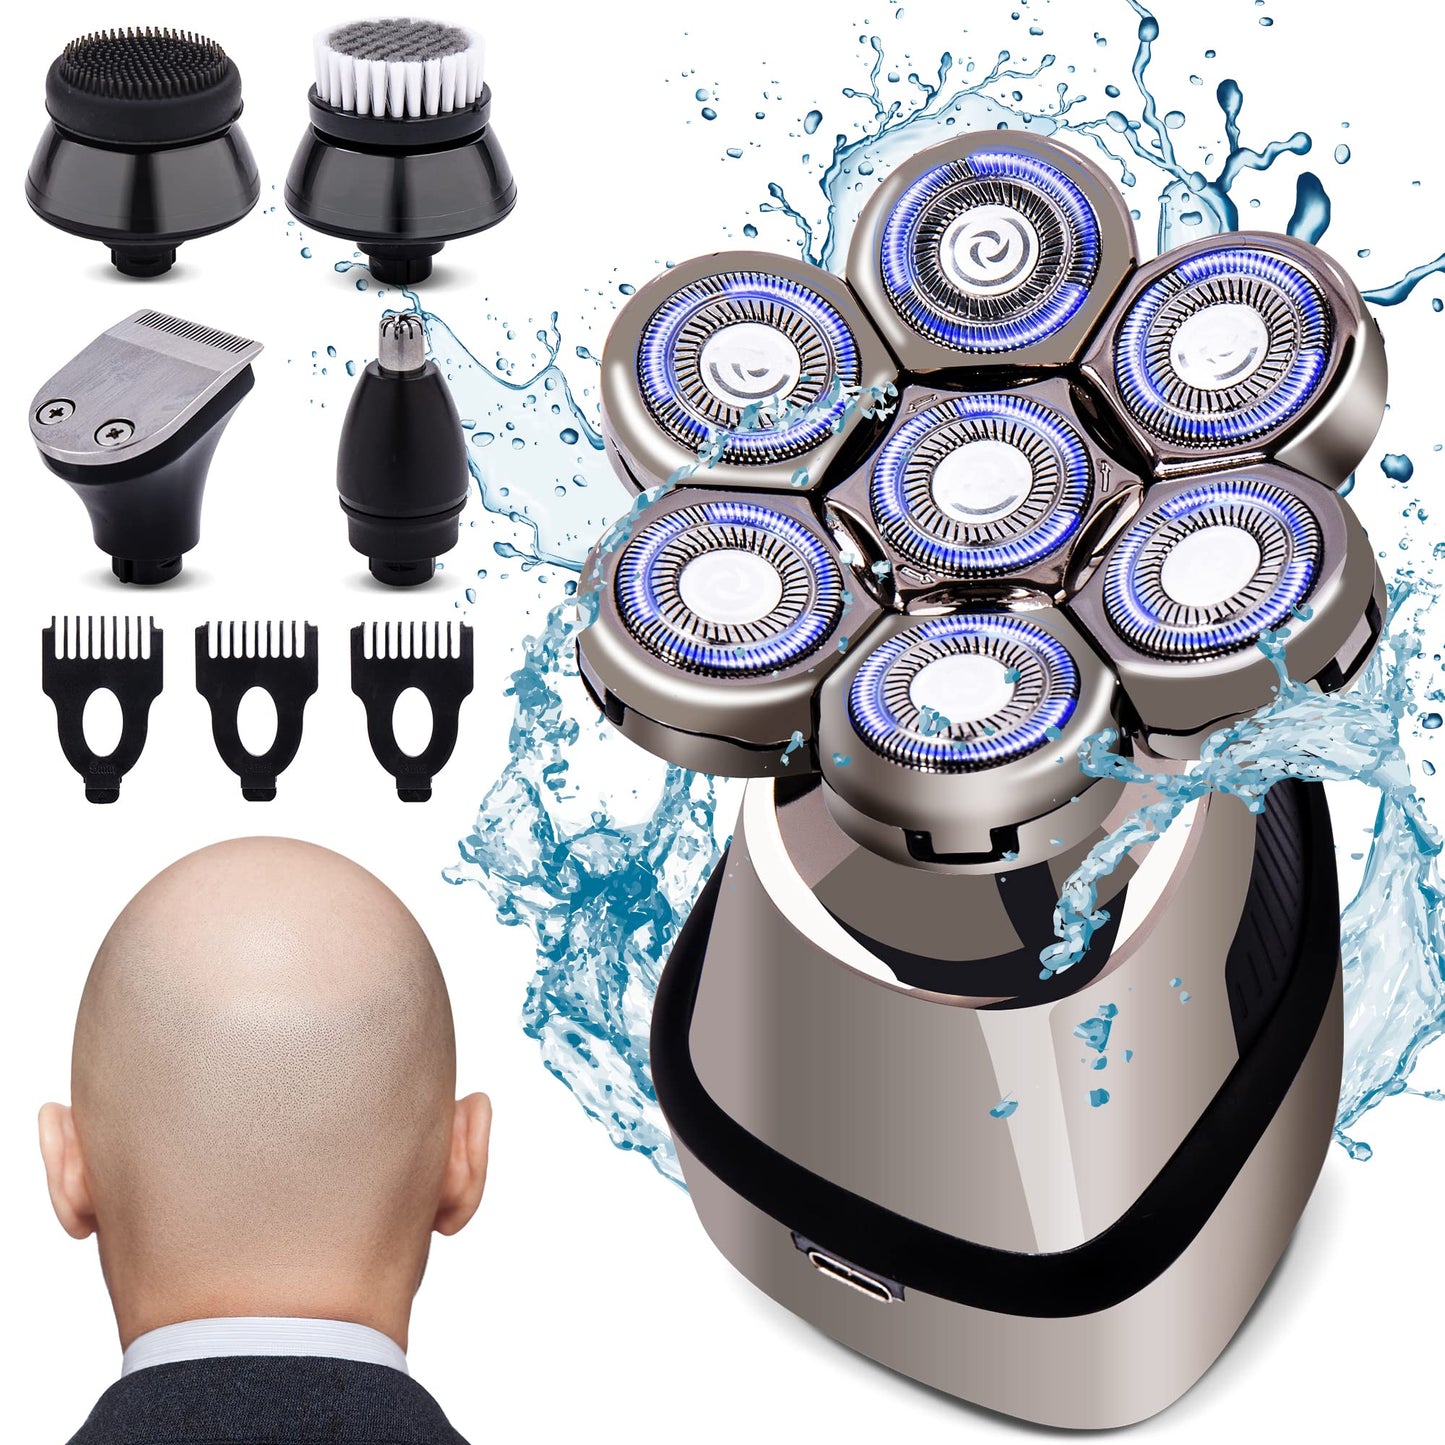 AW Robot 7D Head Shavers for Bald Men, Anti-Pinch Electric Razor for Men, 5-in-1 Mens Grooming Kit with Nose Hair Trimmer, Beard Trimmer for Men, Waterproof and Rechargeable Electric Shavers for Men